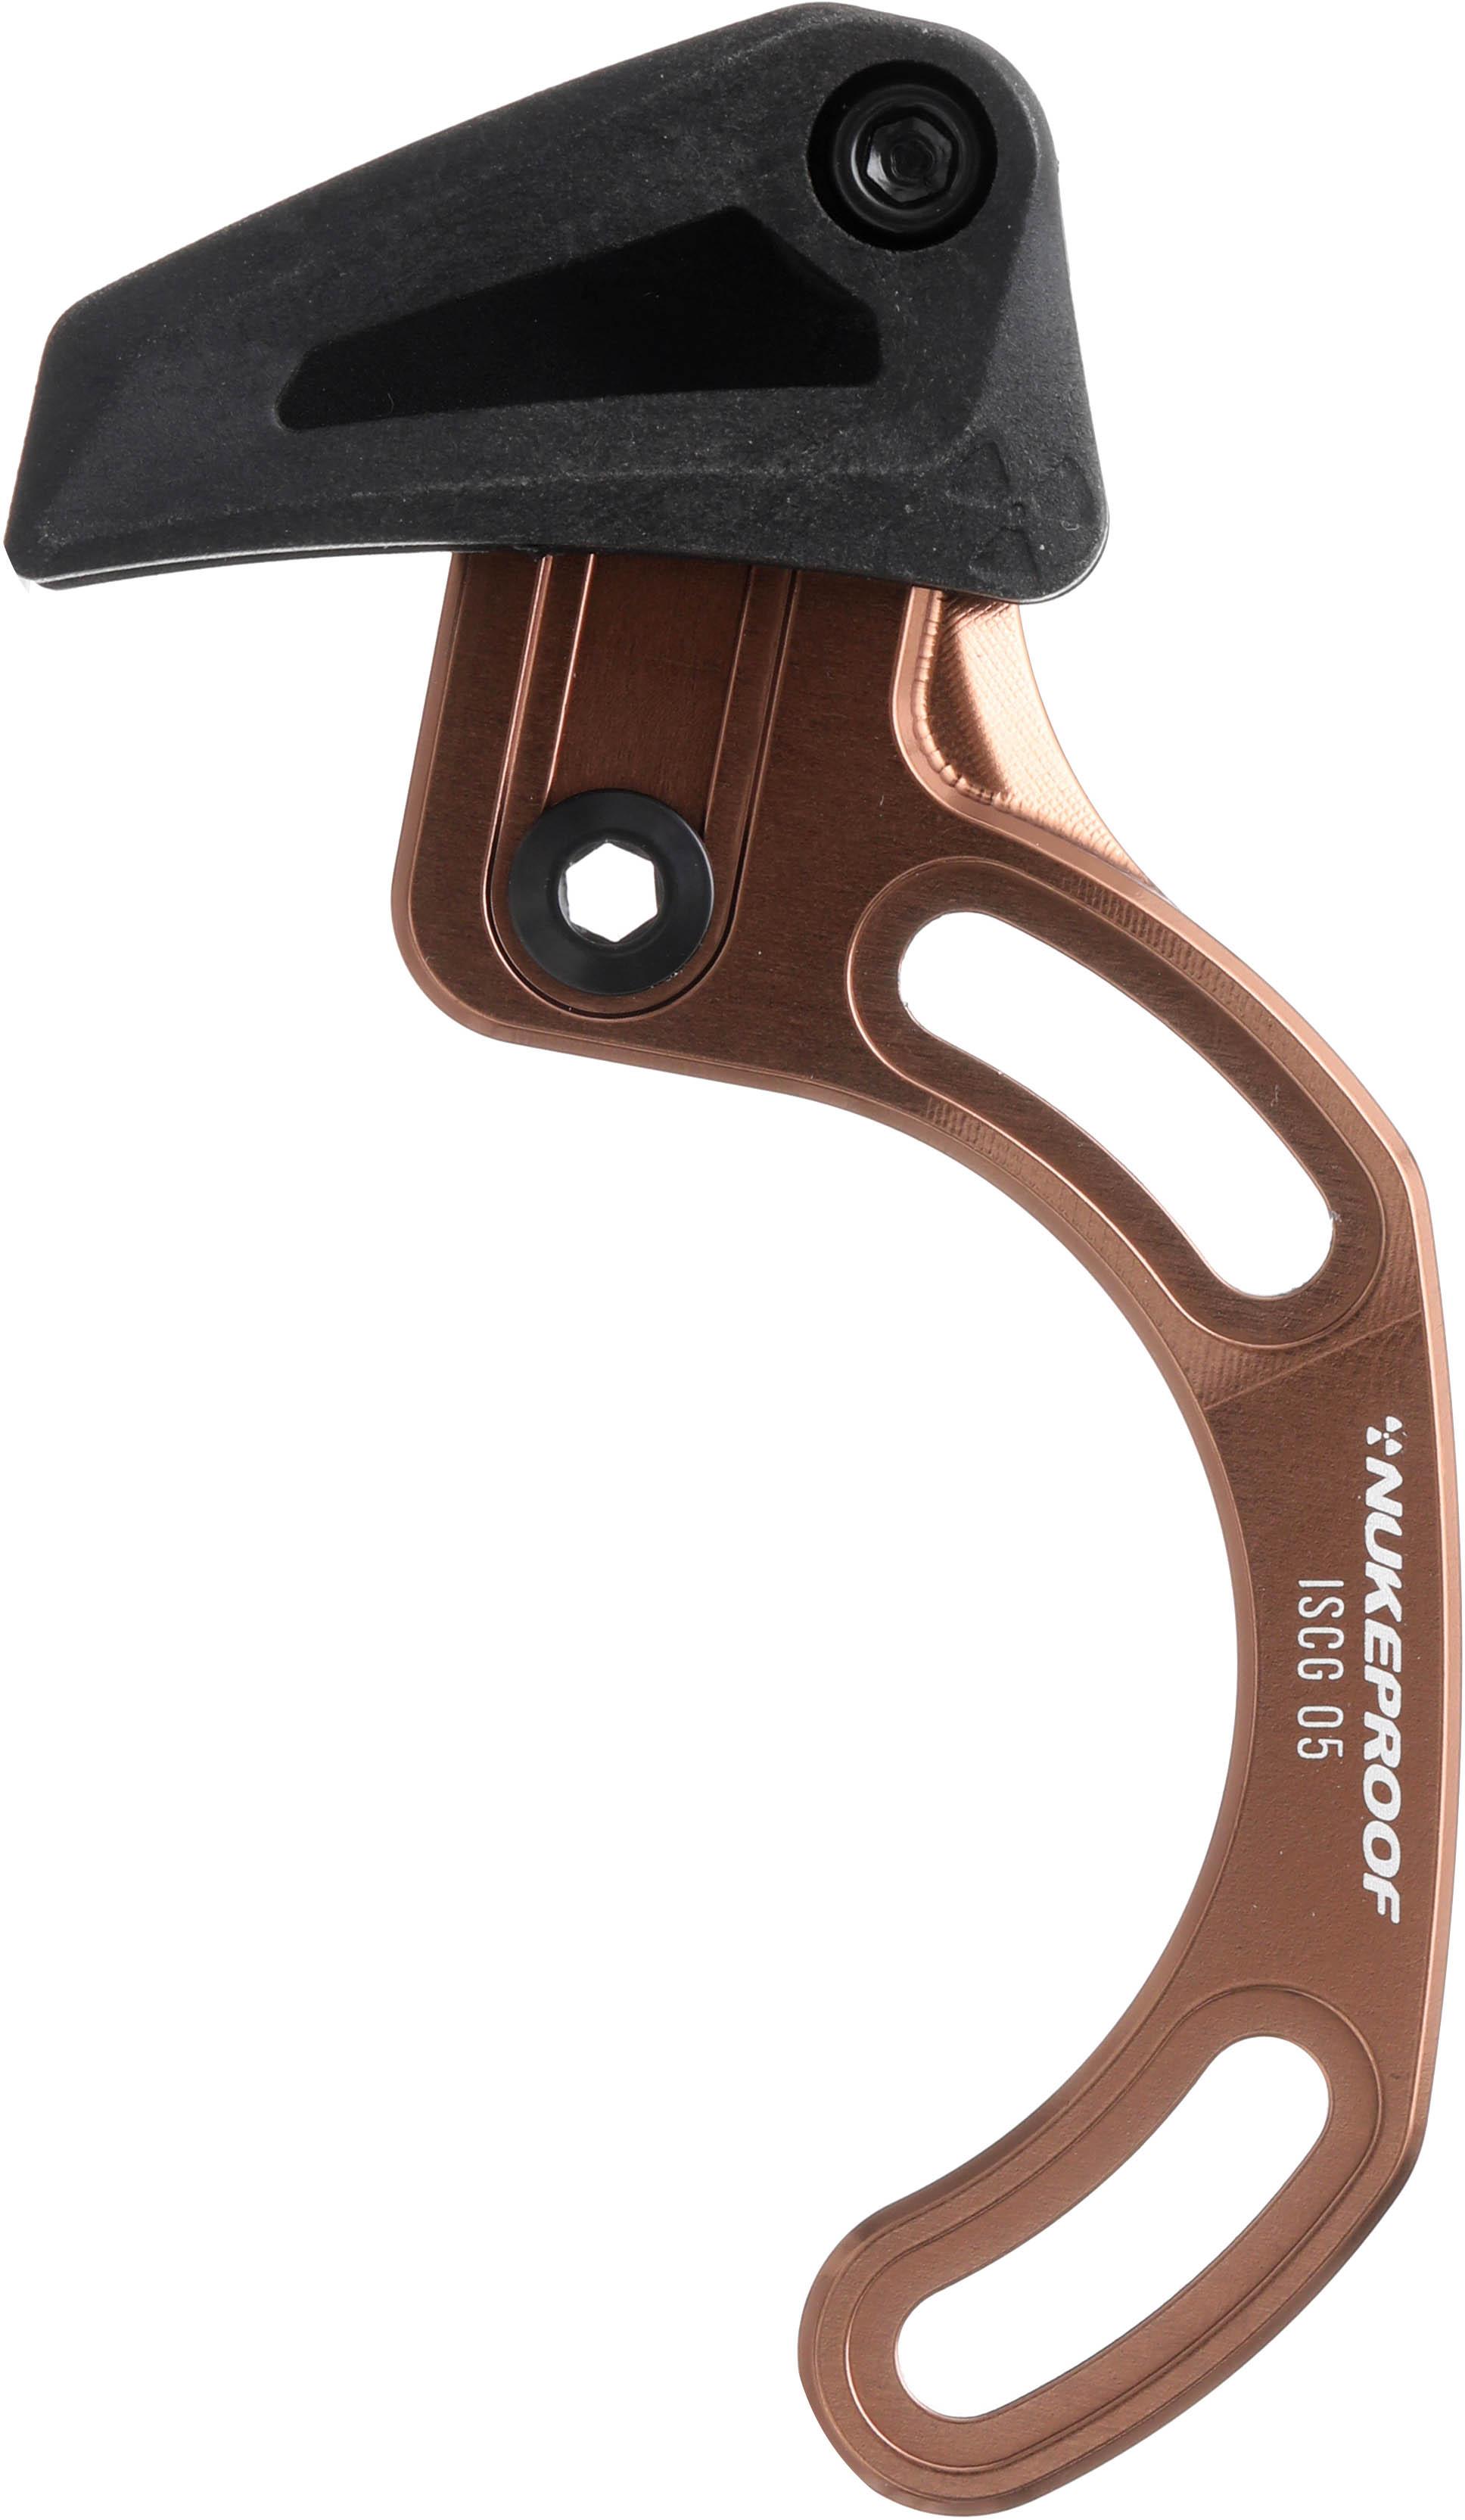 Nukeproof Chain Guide Iscg 05 Top Guide  Copper/black